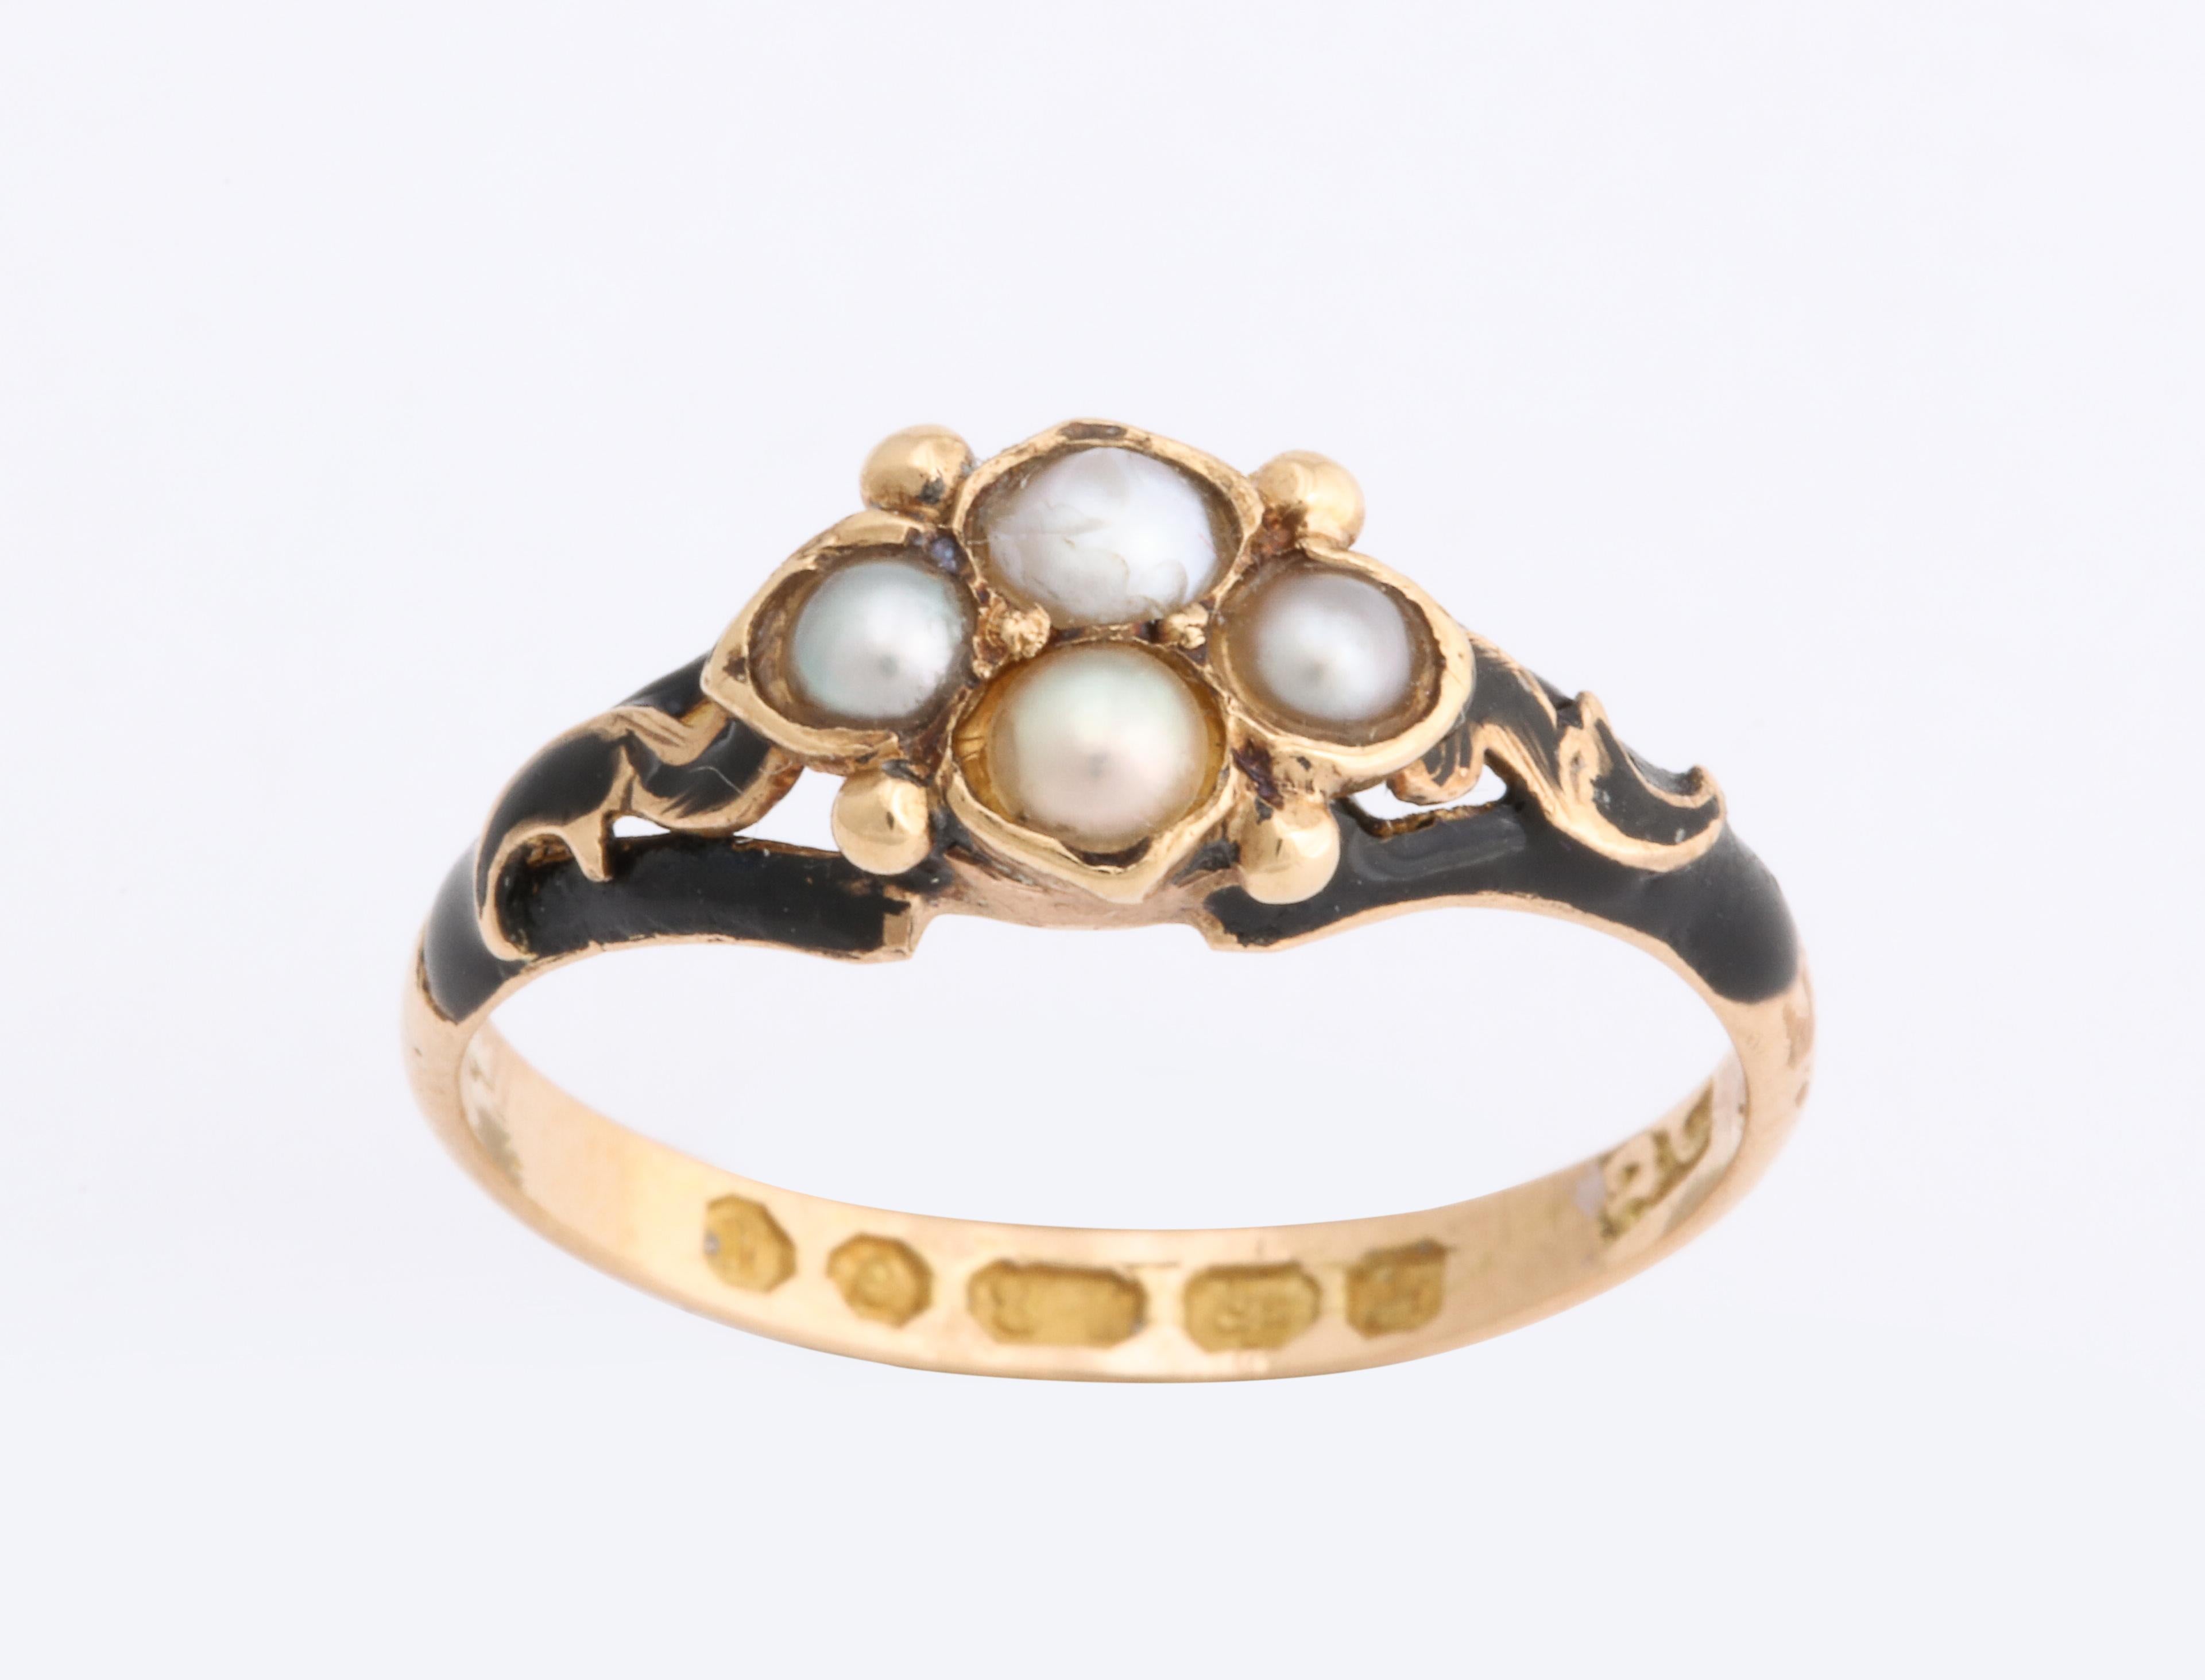 Designed as a forget me not pearl cluster surrounded by black enamel enhanced with gold scrolls, the reverse fitted with hair compartment, mounted in 18k gold.

Fully hallmarked for London 1858 on inside of shank

Size 6

Mourning rings were made